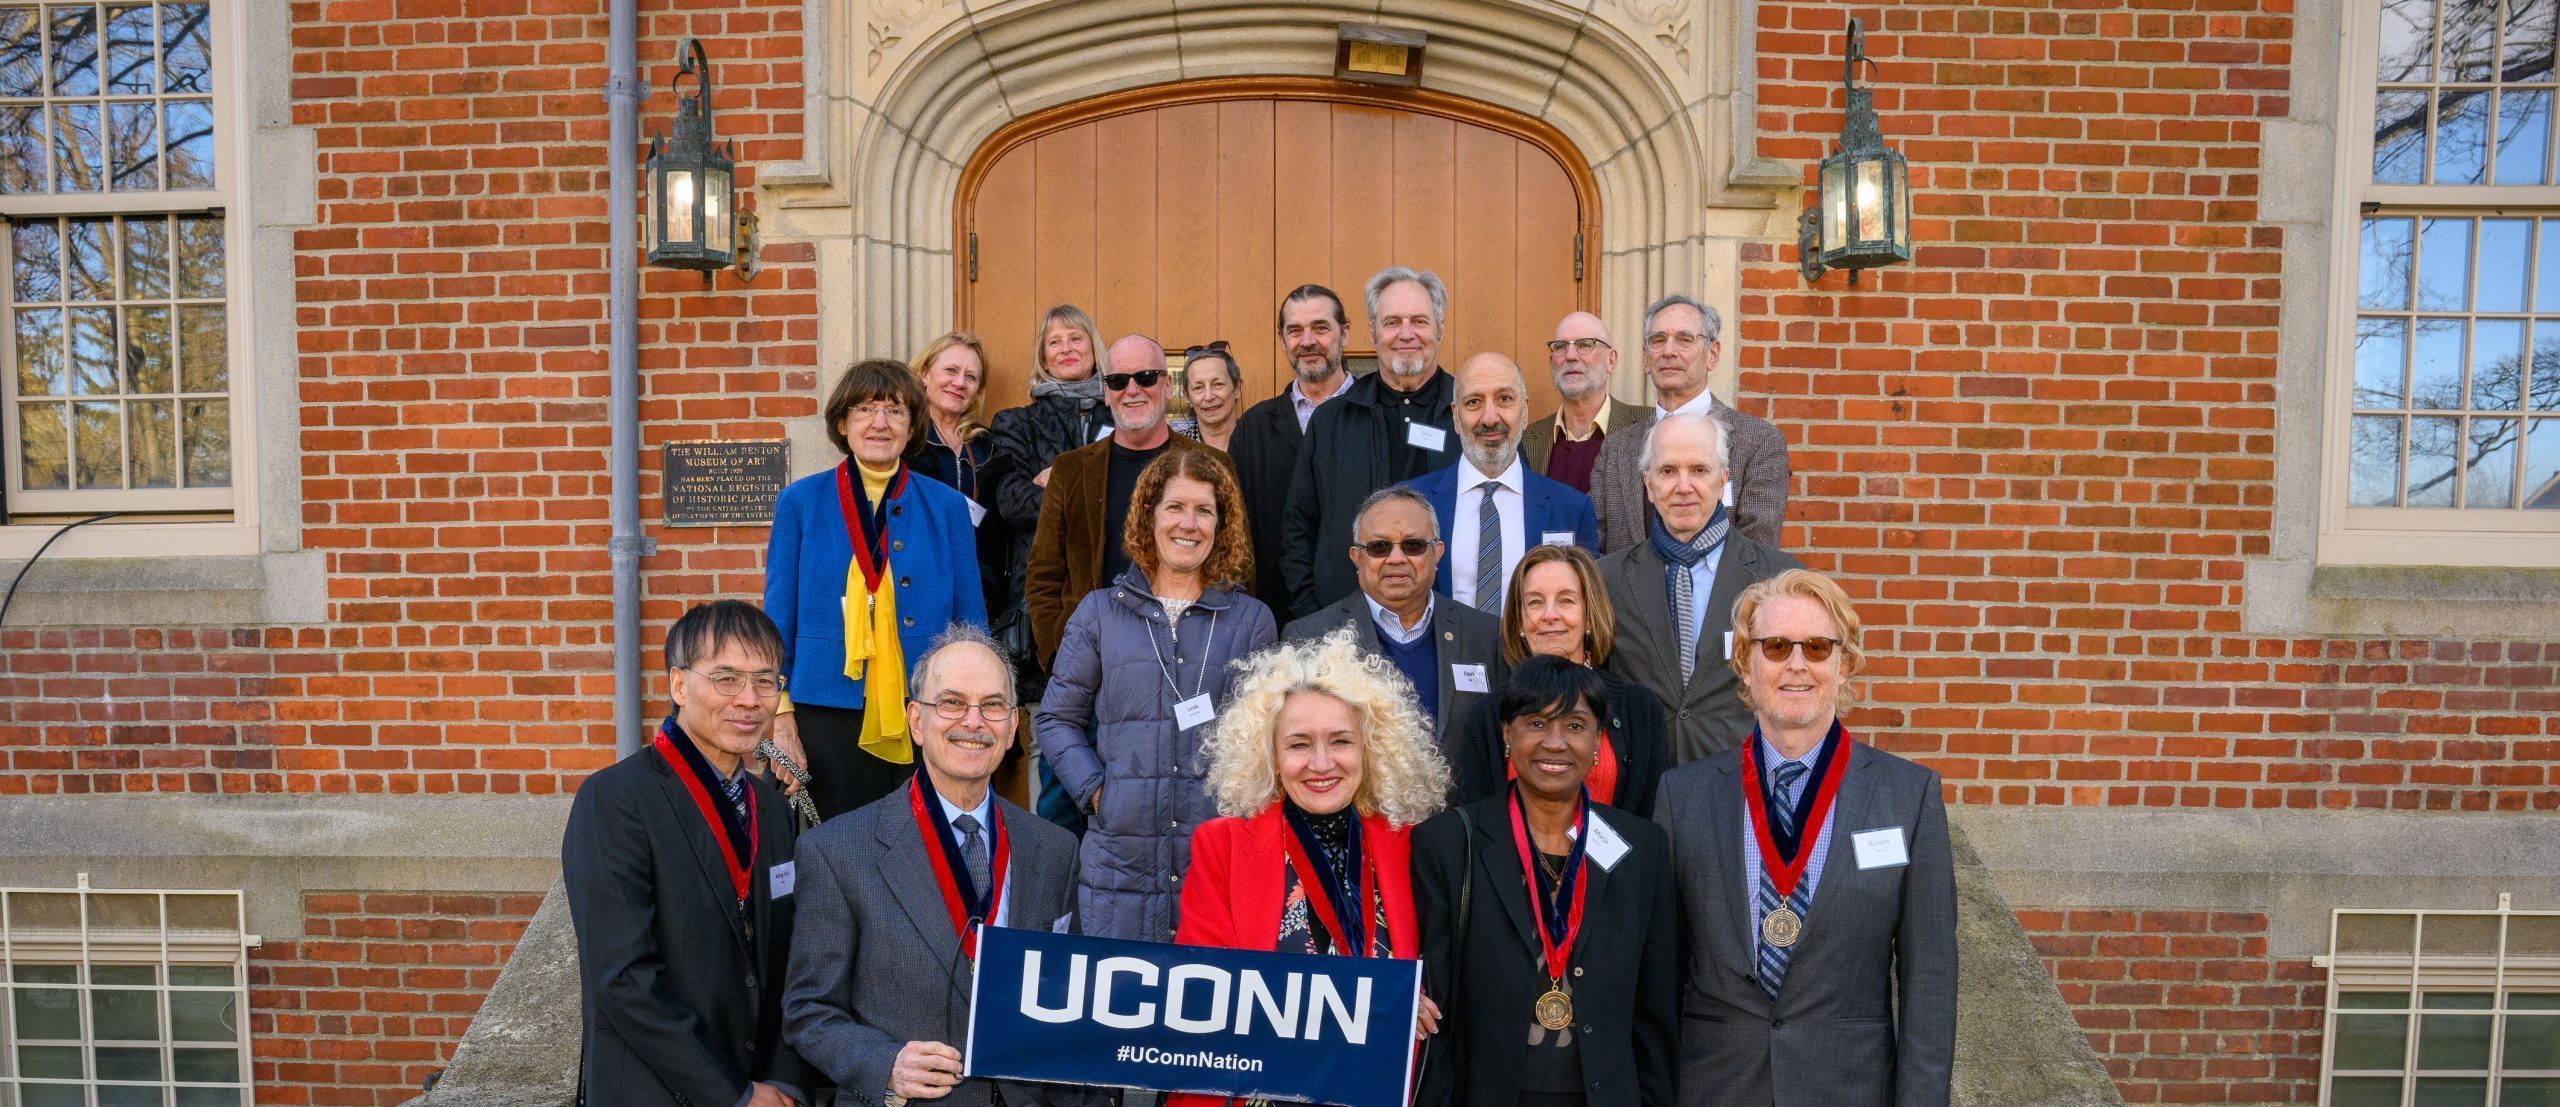 Current and past recipients of the Board of Trustees Distinguished Professor Award pose for a photo at the Benton Museum on April 5, 2022. (Peter Morenus/UConn Photo)